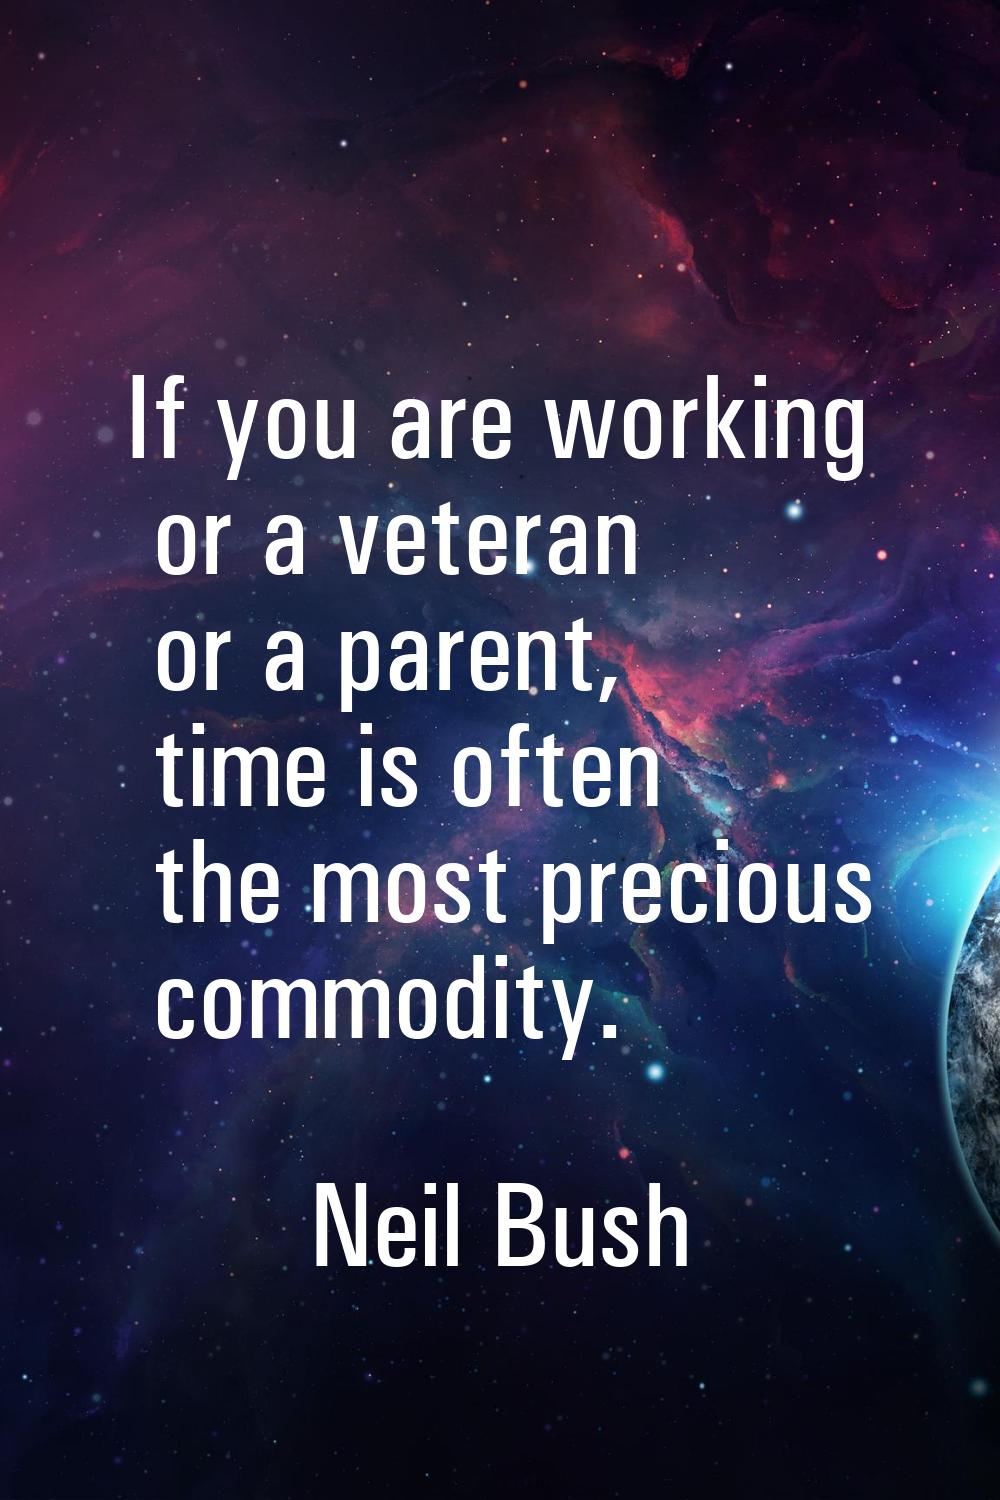 If you are working or a veteran or a parent, time is often the most precious commodity.